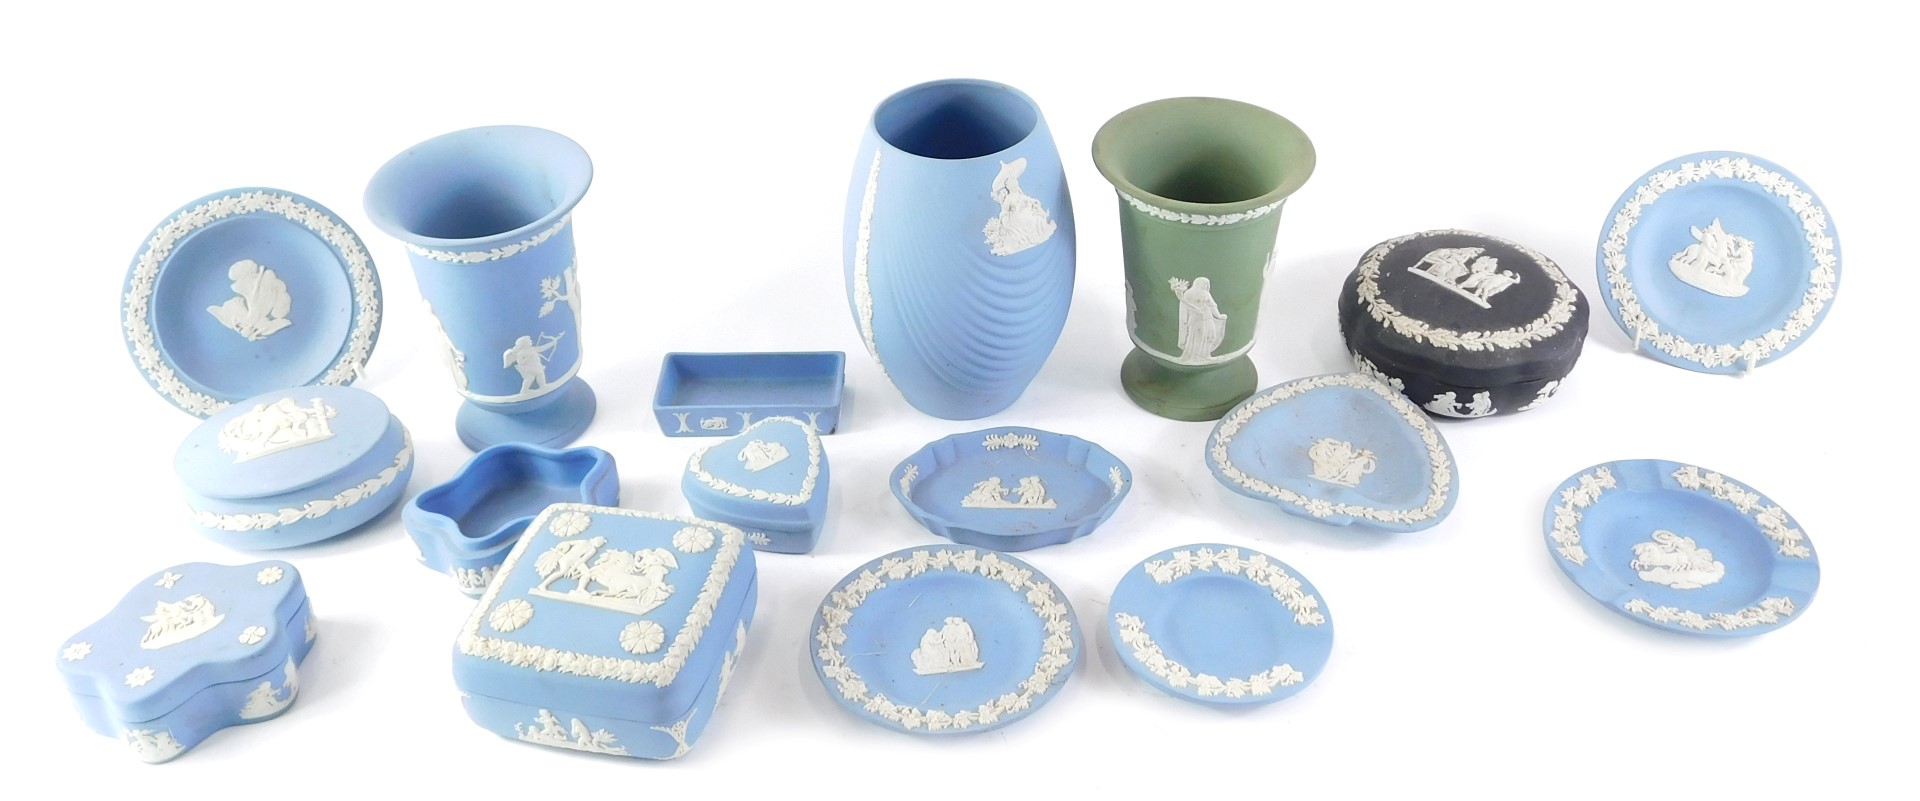 A collection of Wedgwood Jasperware, blue, black and green.